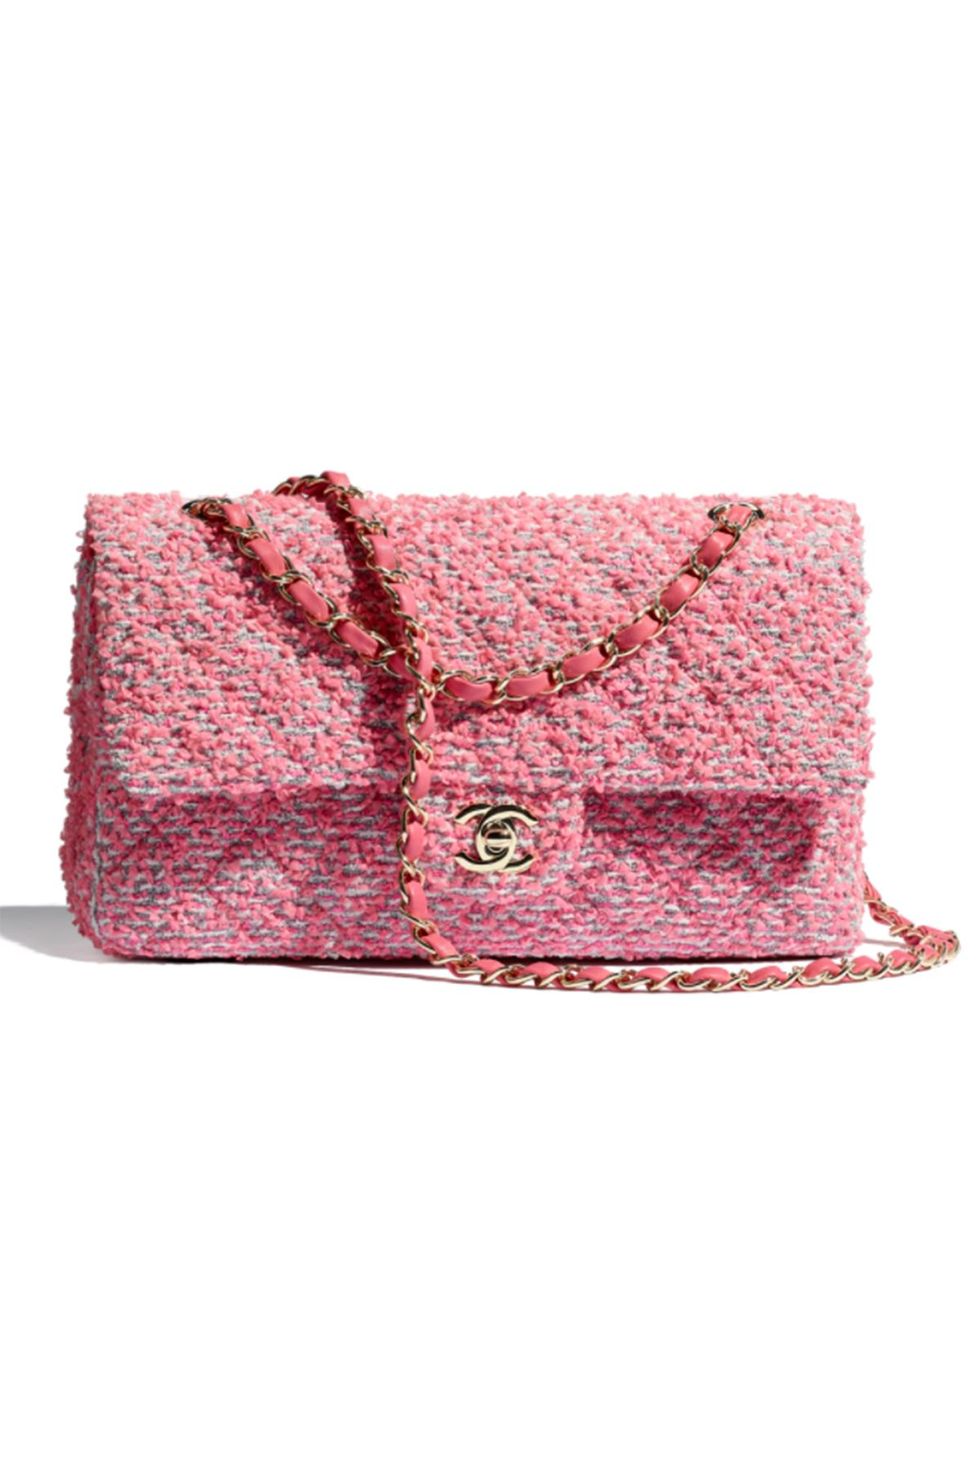 Chanel Hand Bag Tweed Sequins - Fablle